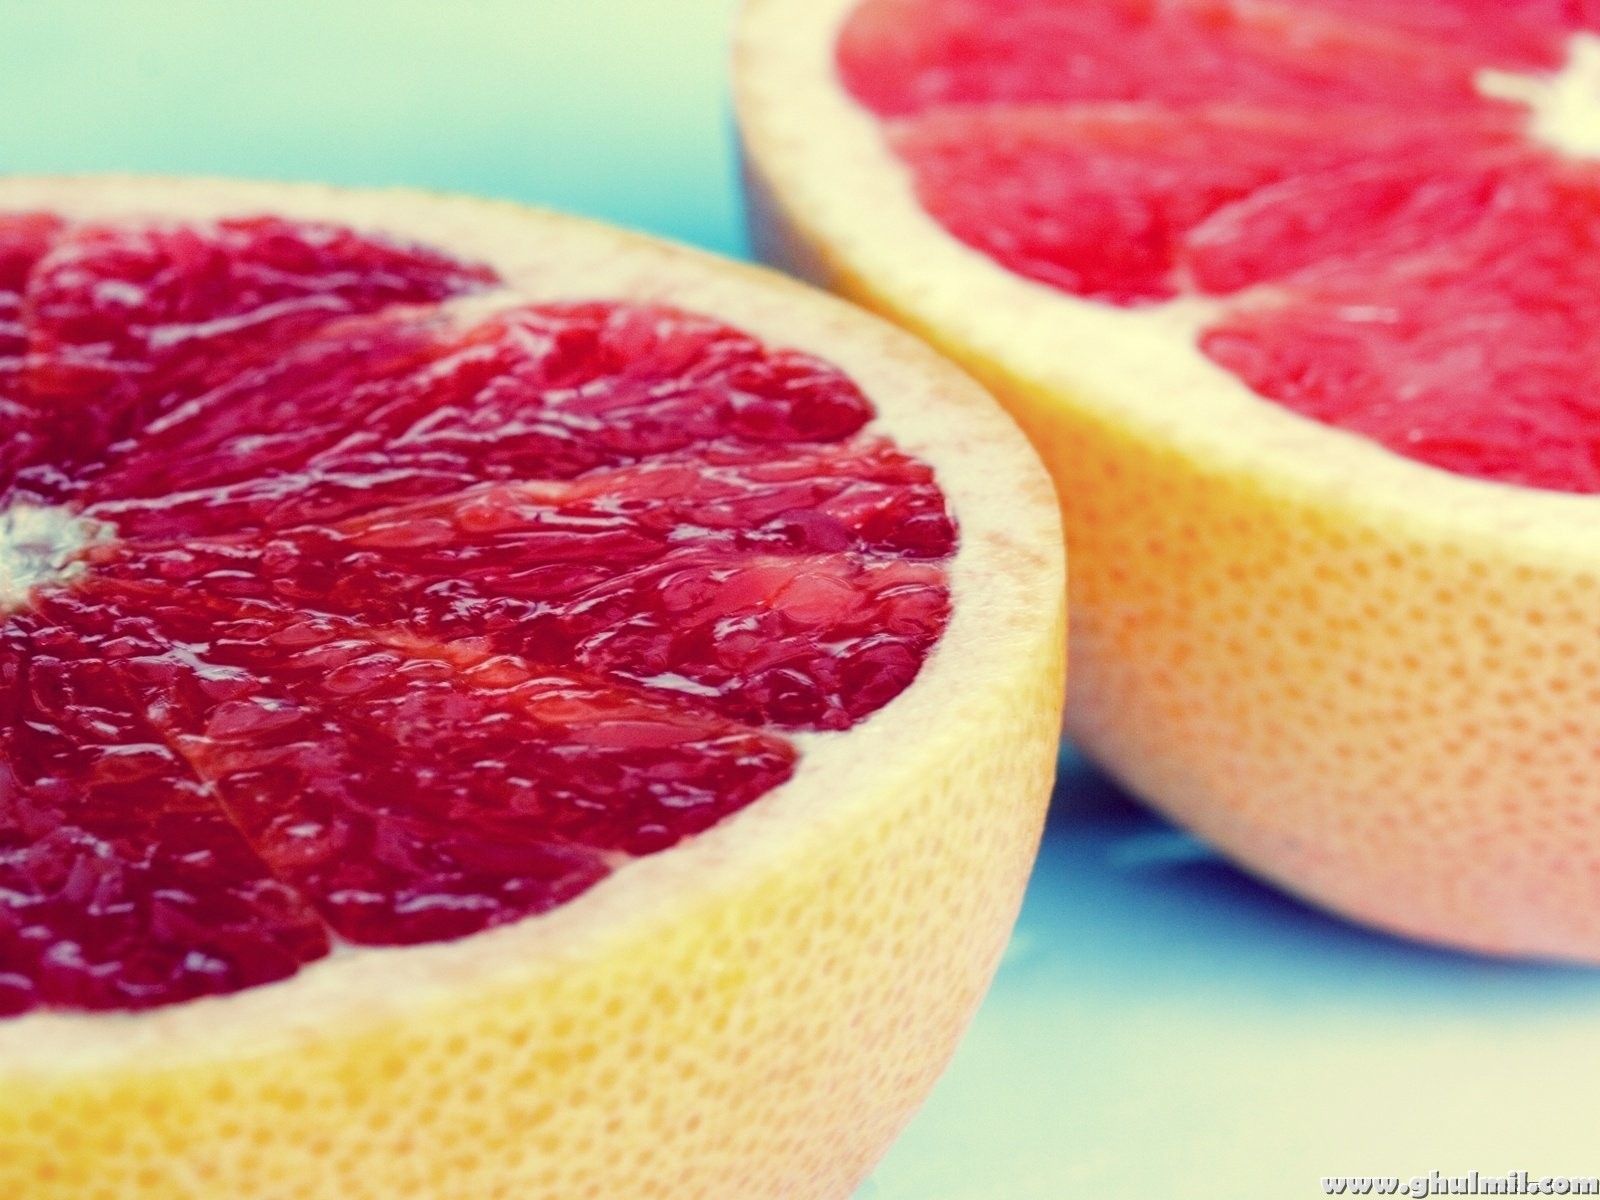 diet tip: 1/2 a grapefruit before every meal helps the body's metabolism